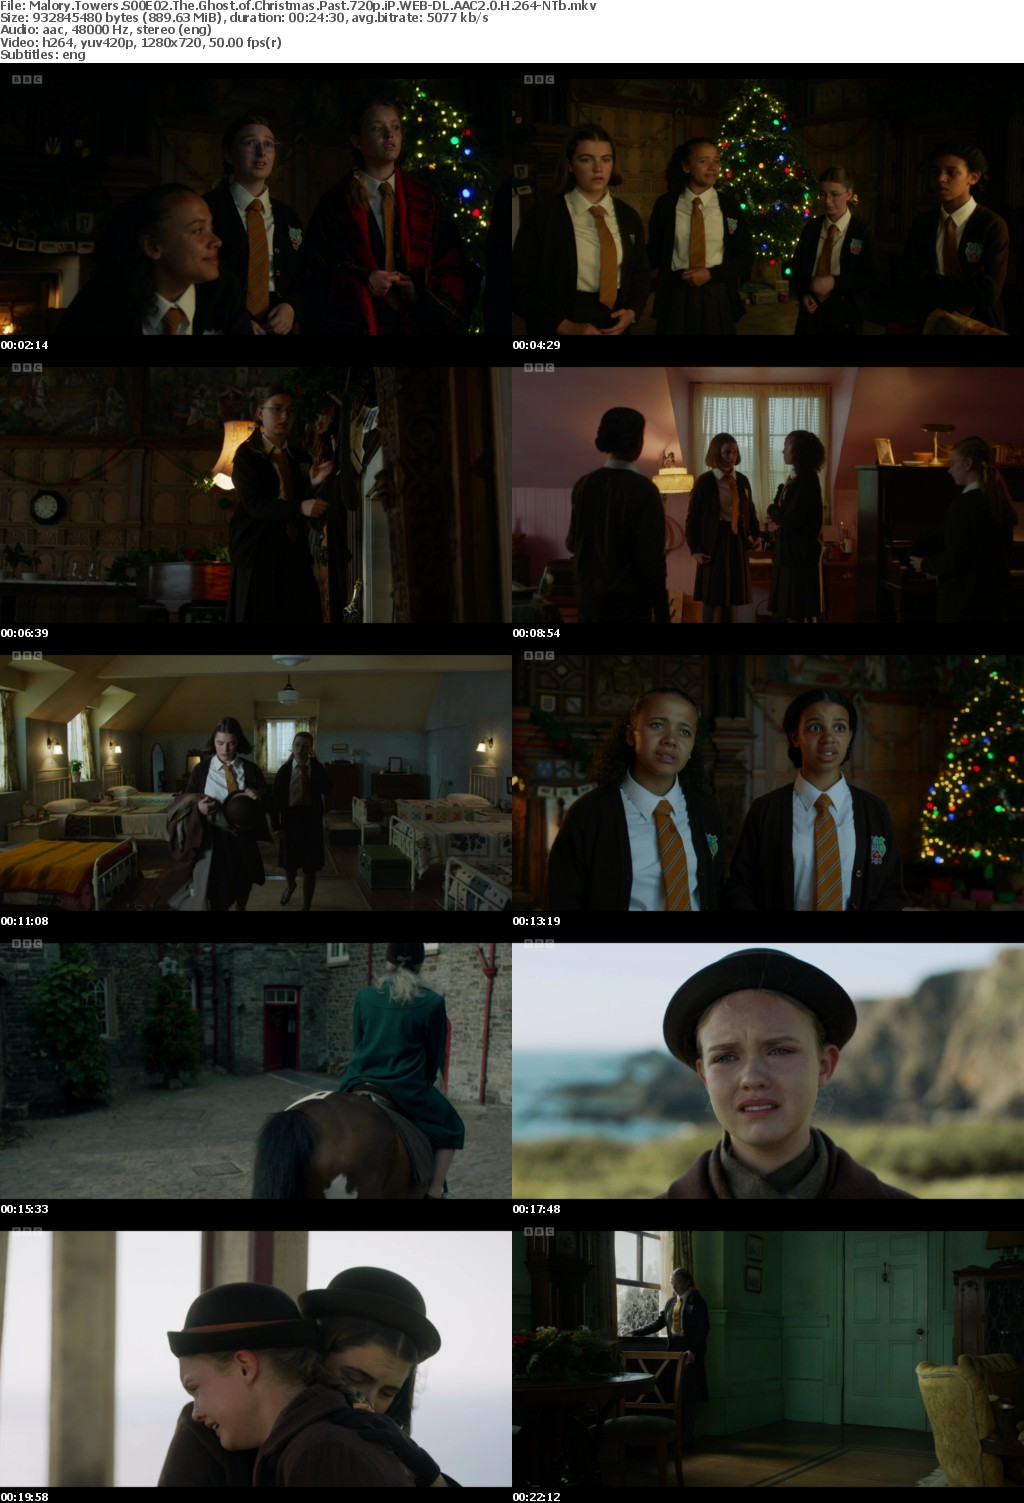 Malory Towers S00E02 The Ghost of Christmas Past 720p iP WEB-DL AAC2 0 H 264-NTb